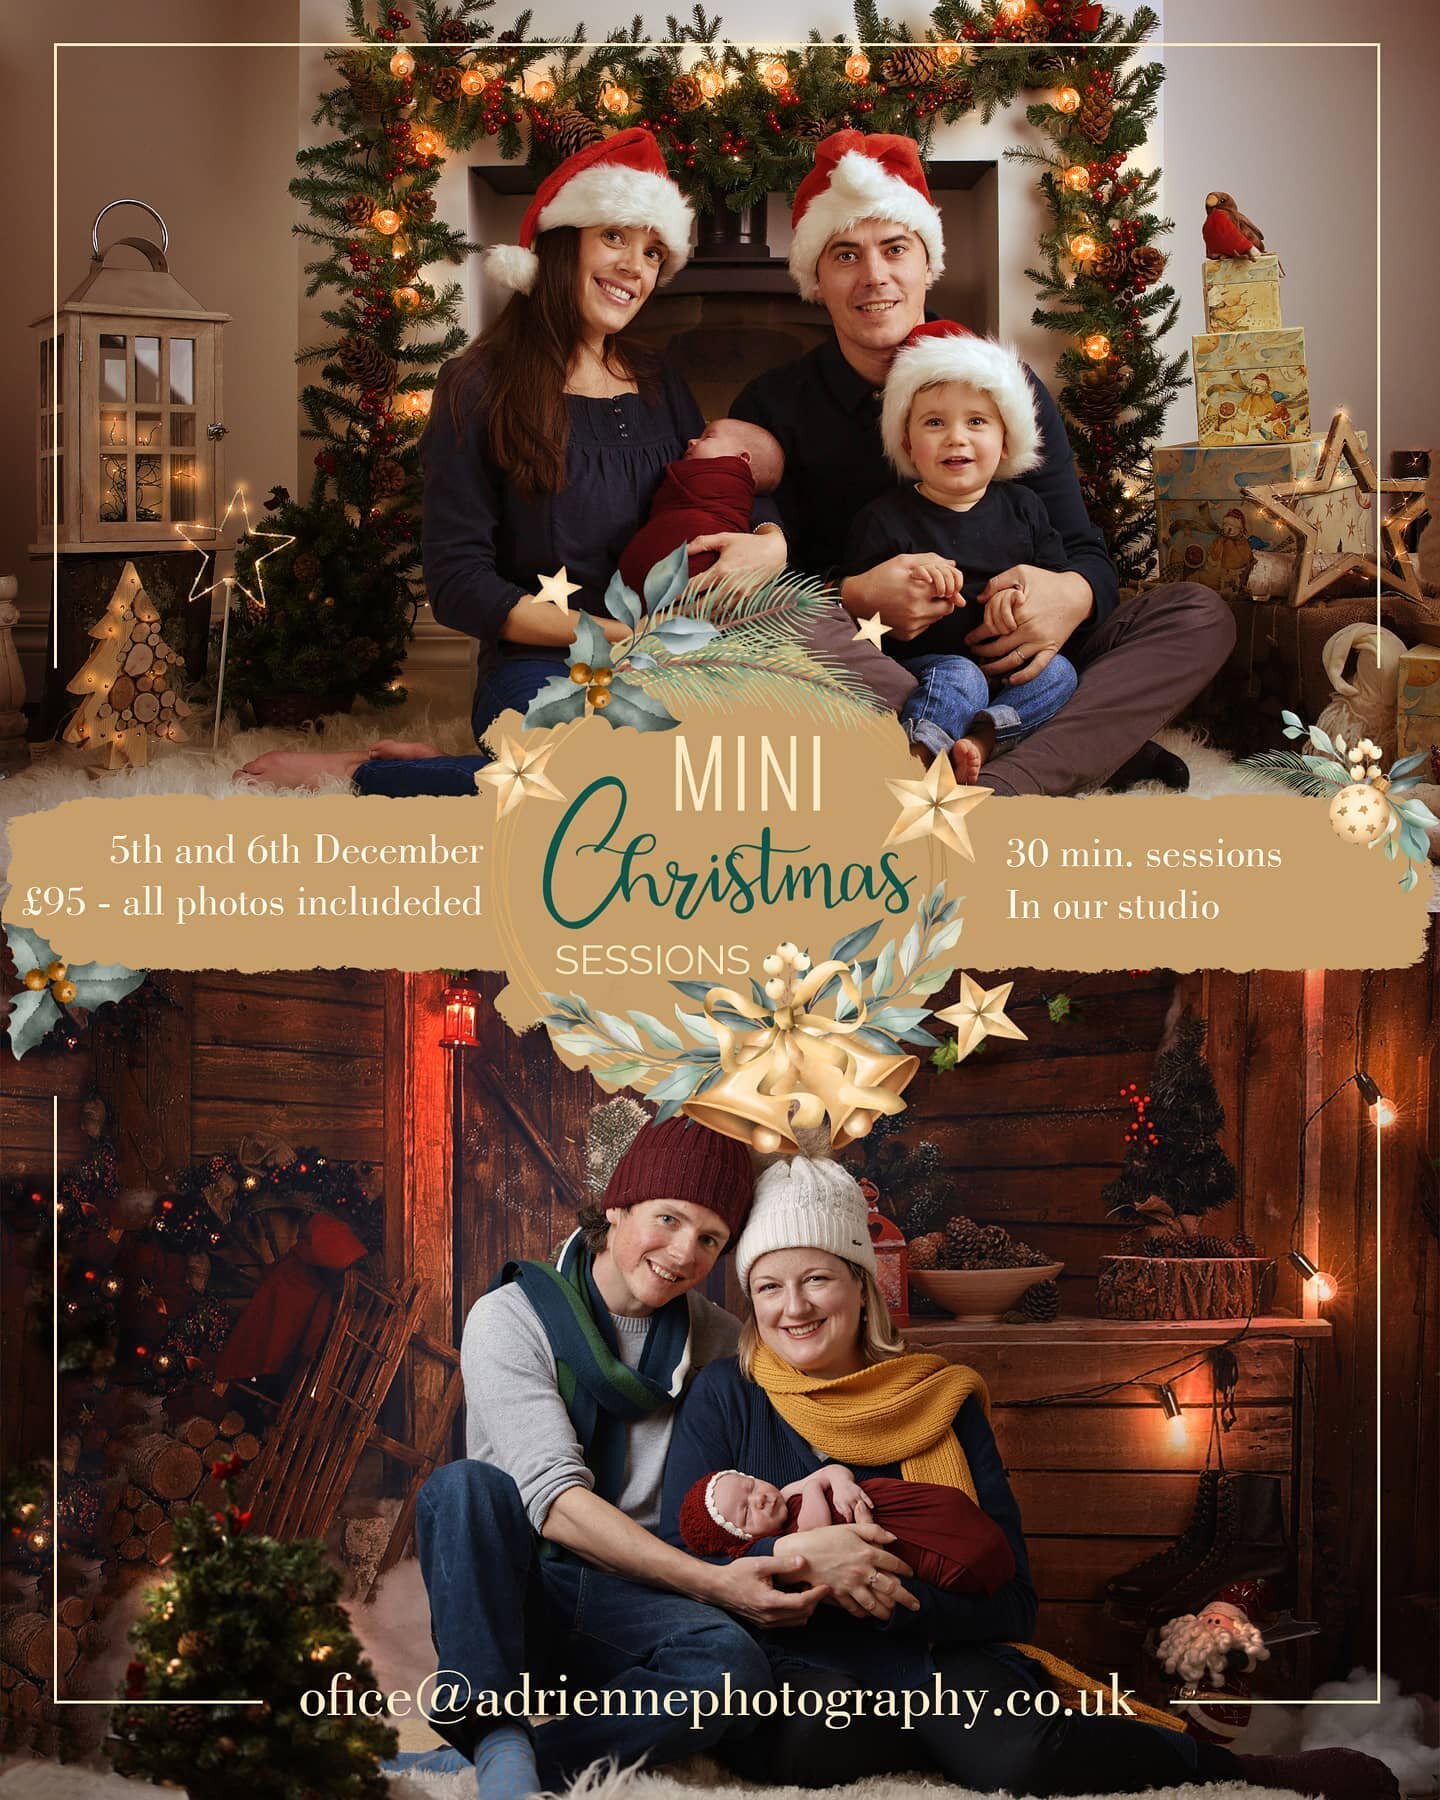 🎅Christmas Mini sessions 2020 are here!🤶 Limited availability remaining. 

 🎁 We all had such difficult times over the year, perhaps over the holiday season we can hope for a true Christmas miracle. We'd like you and your family to get into the Ho